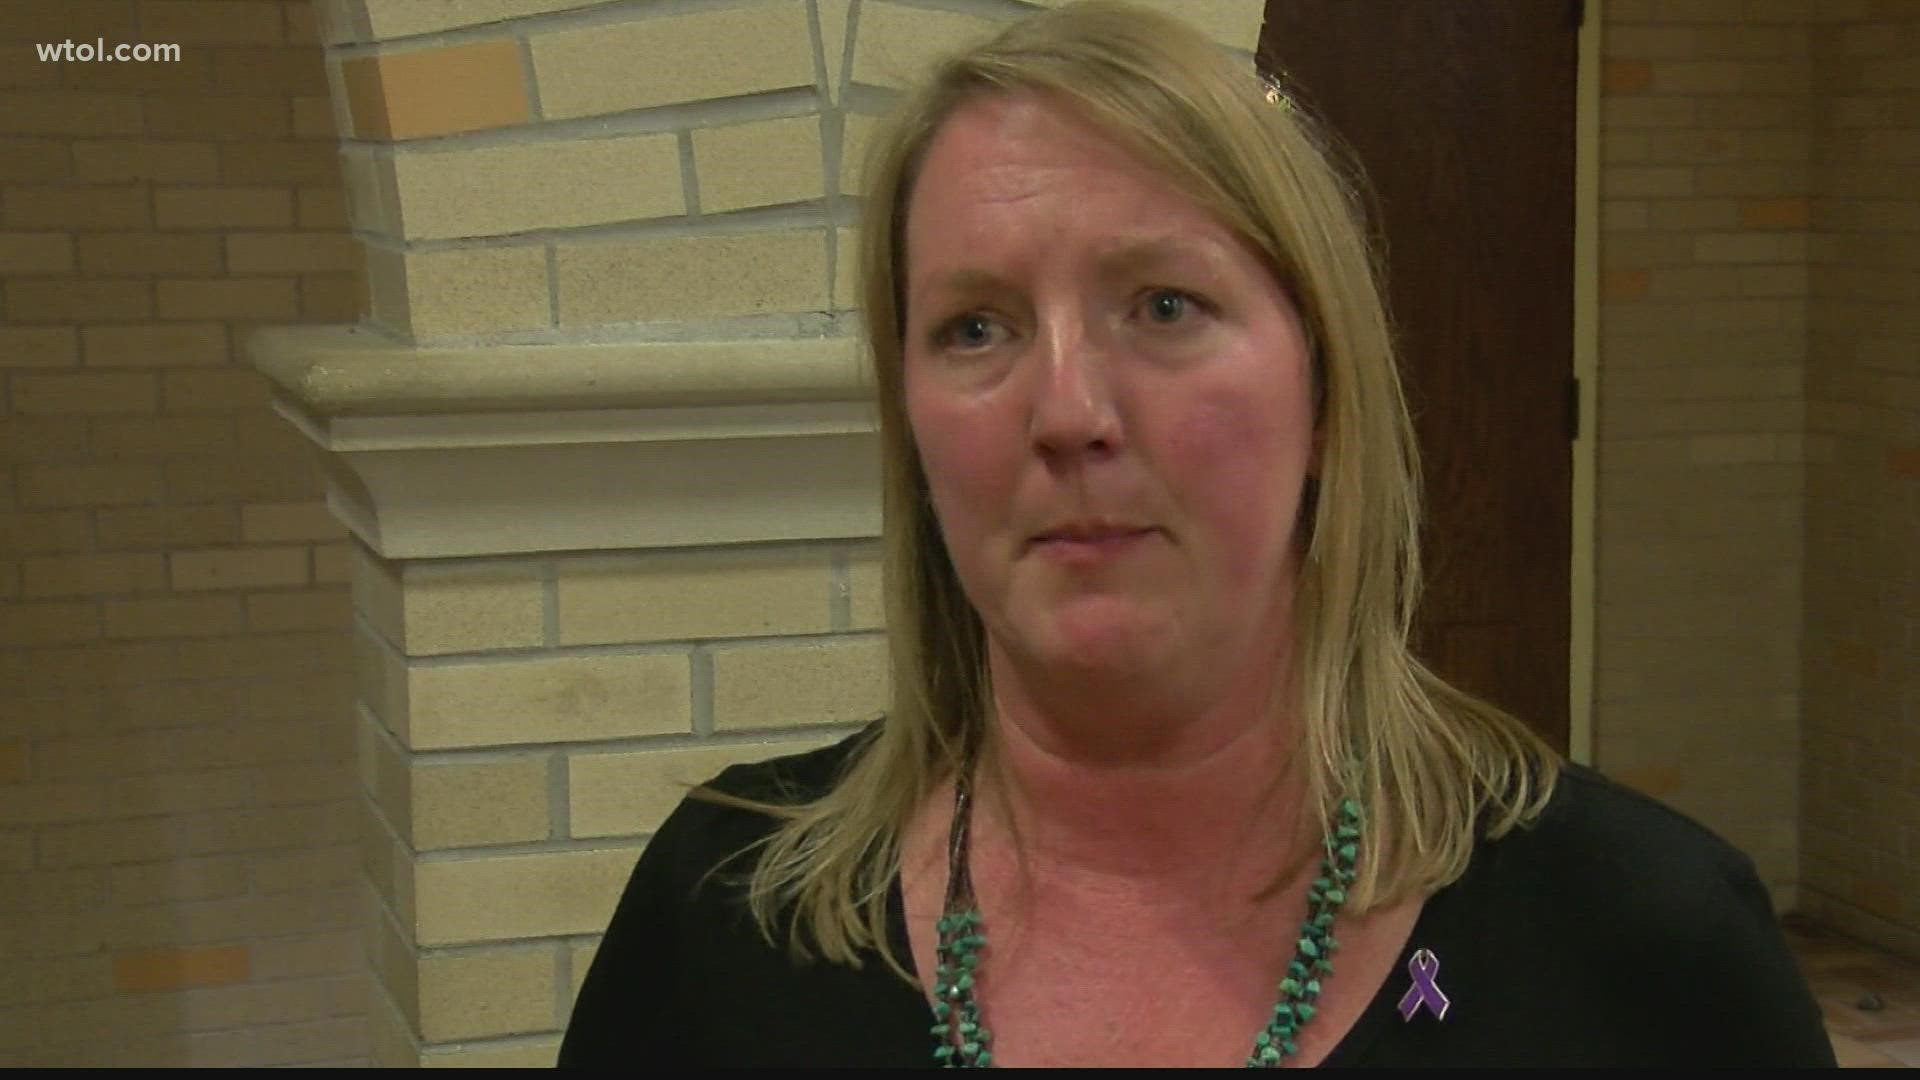 Officials at Bethany House in Toledo said 1 in 3 women suffer from some form of domestic violence at some point in their lives.